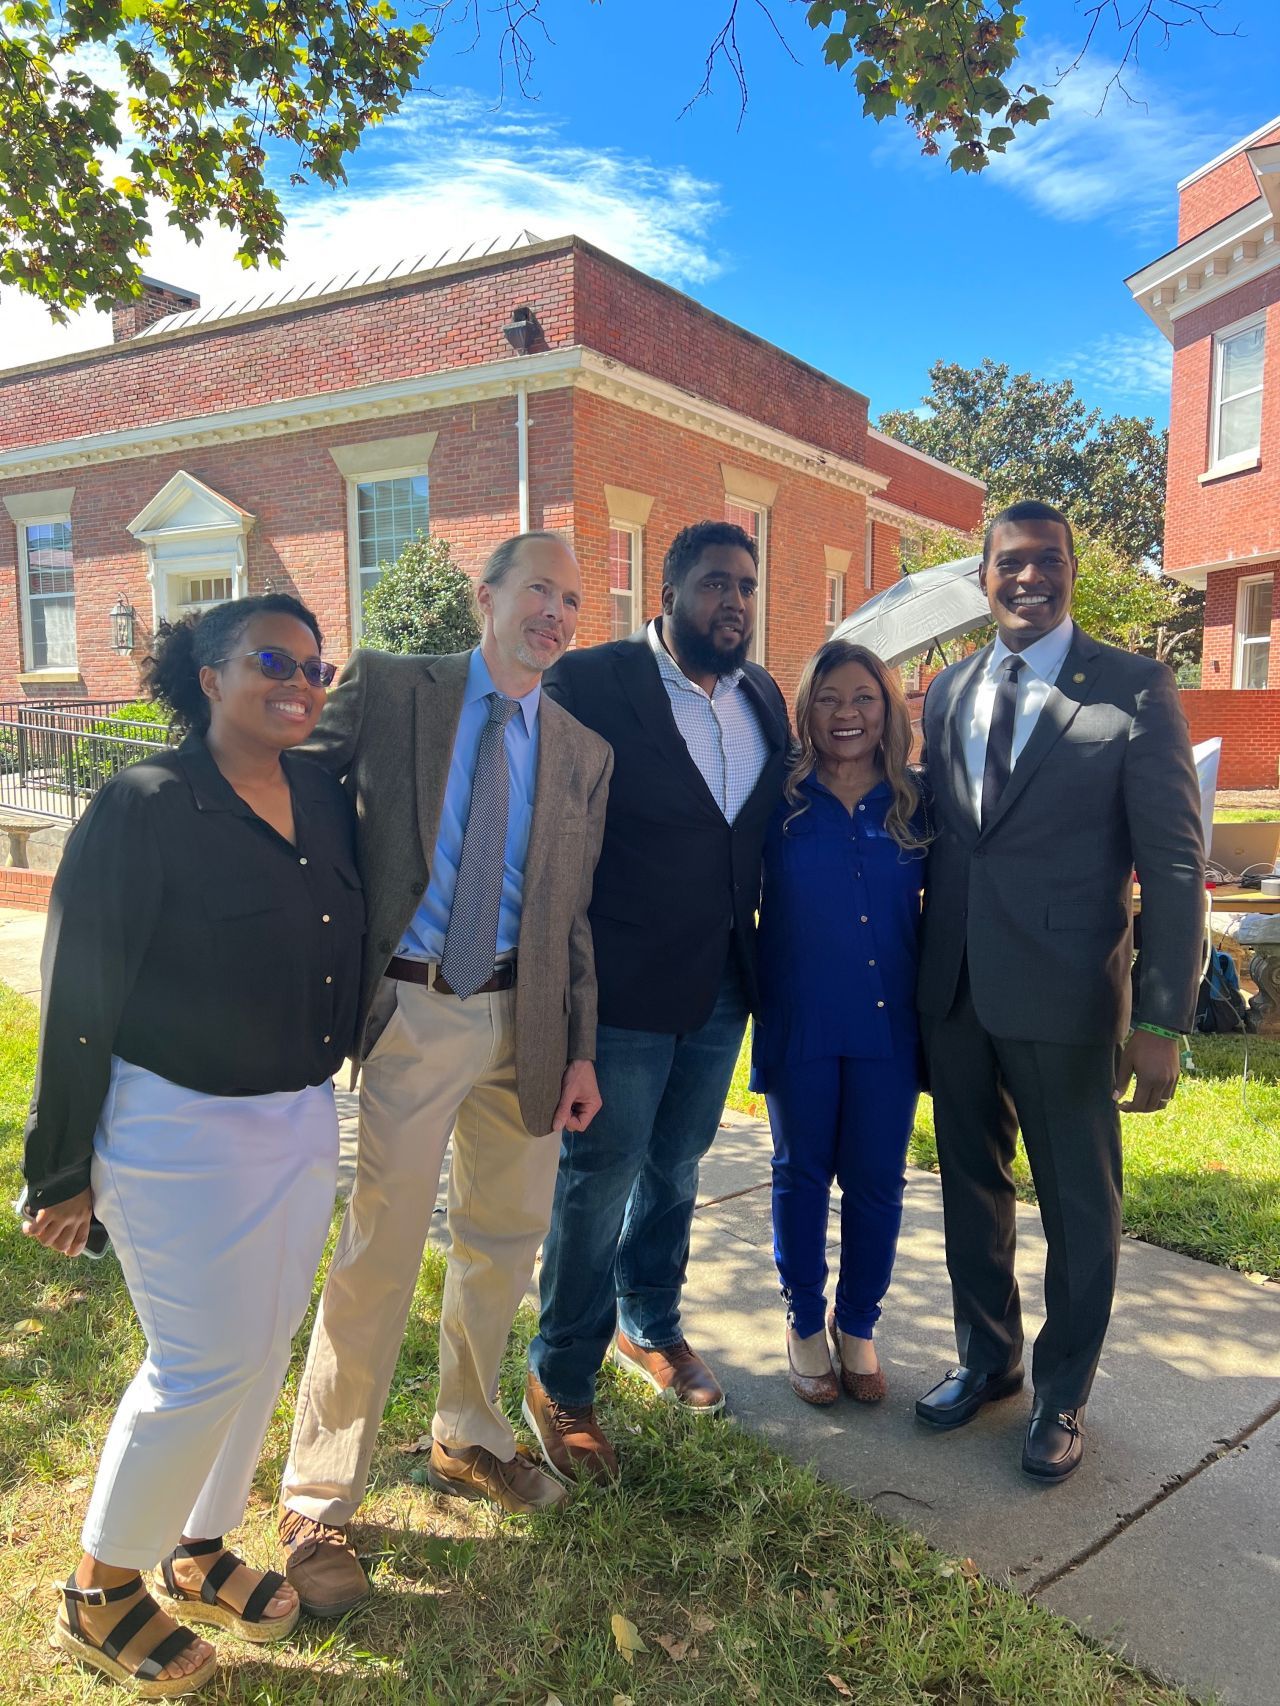  Cameron standing with EPA Administrator Michael Regan and leaders from Appalachian Voices, the Rural Beacon Initiative, and the Center for Rural Enterprise and Environmental Justice at the landmark announcement of the EPA’s new Office of Environmental Justice and External Civil Rights.